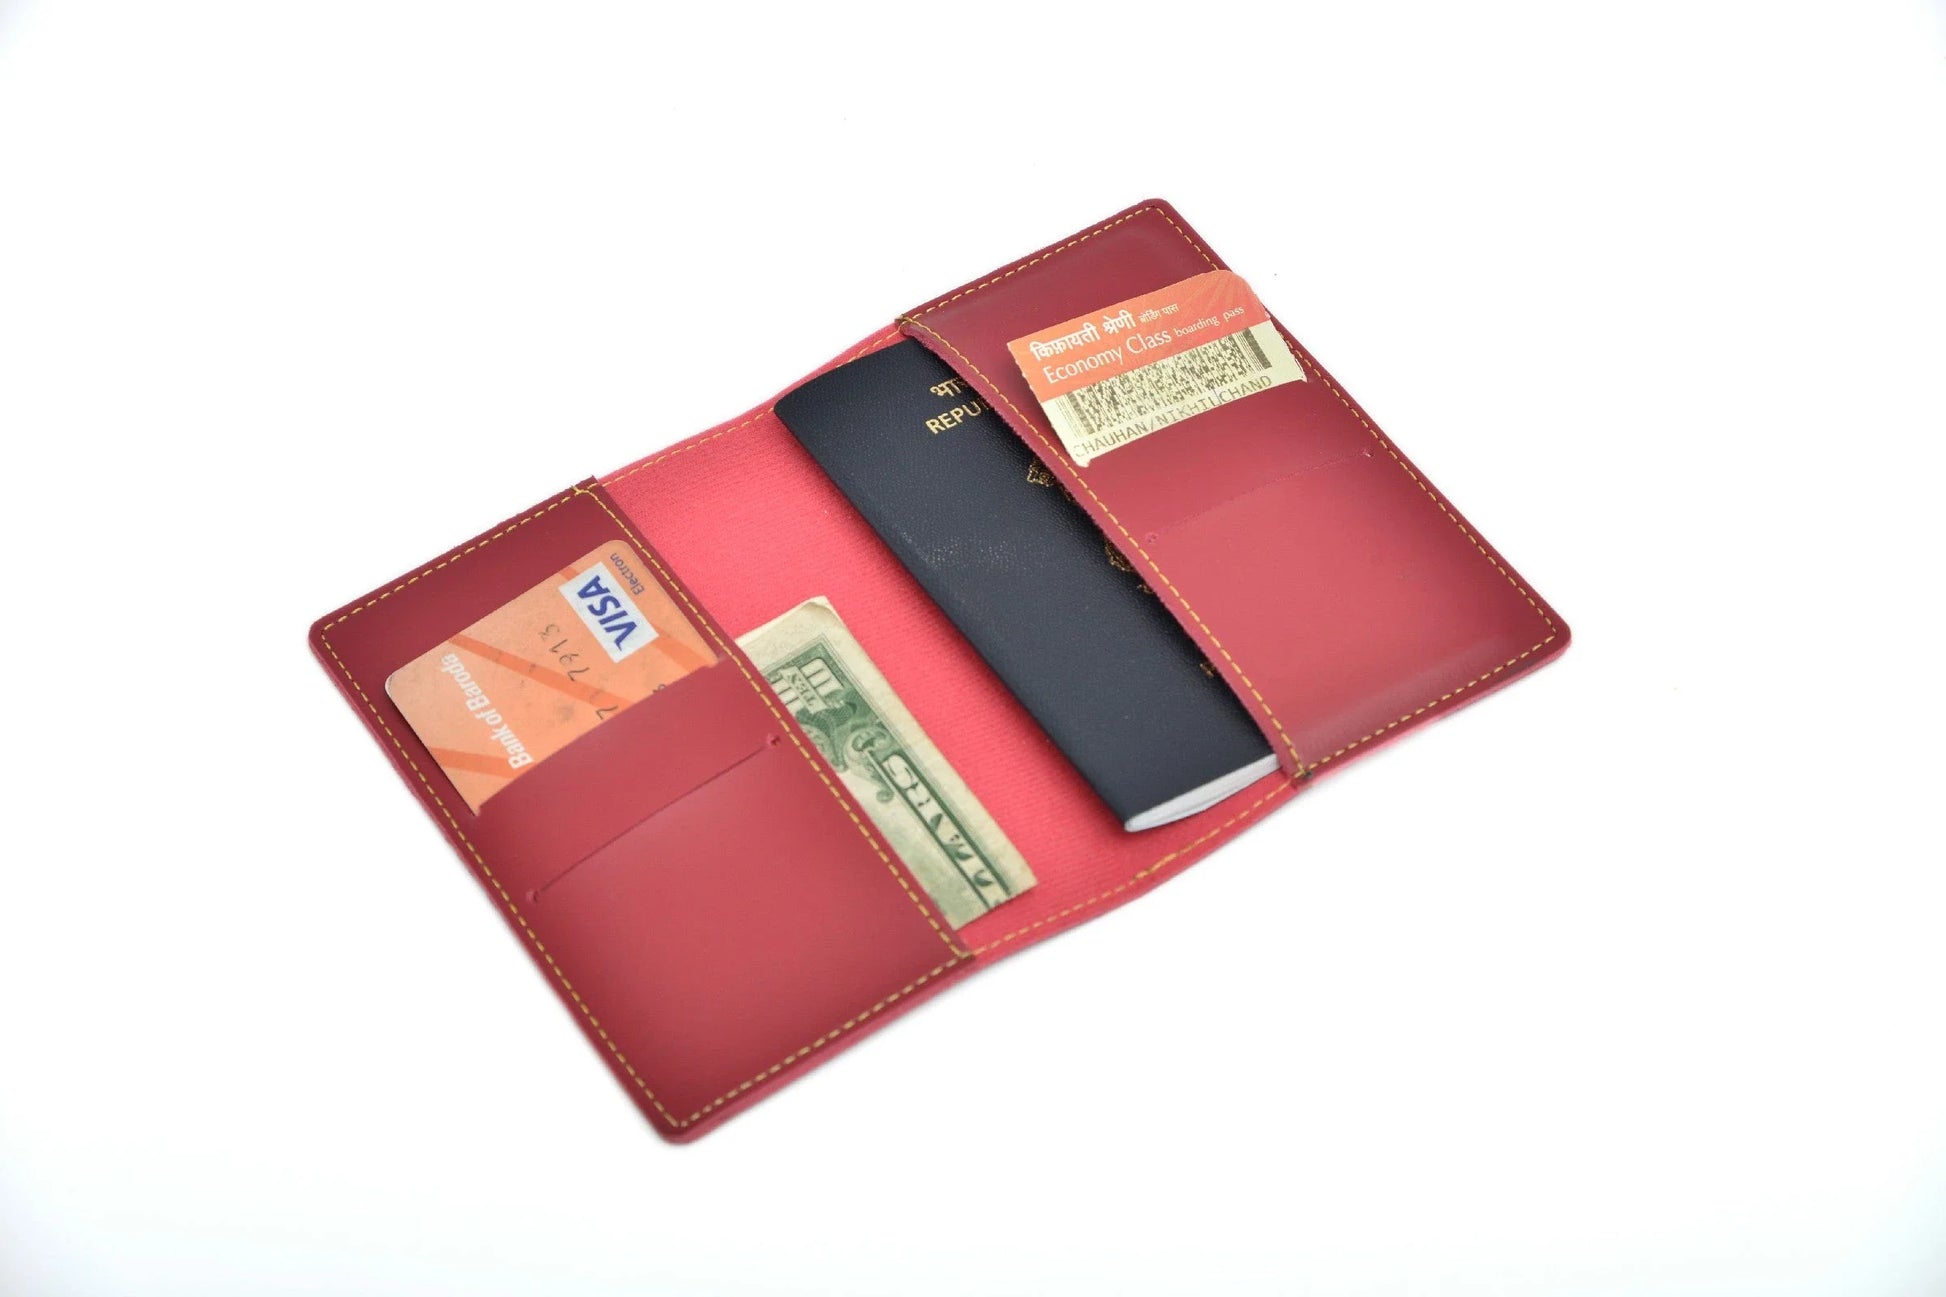 Get your high-quality, classy, affordable and long-lasting passport holder now!personalized-passport-cover-wine-customized-best-gift-for-boyfriend-girlfriend-open image. 